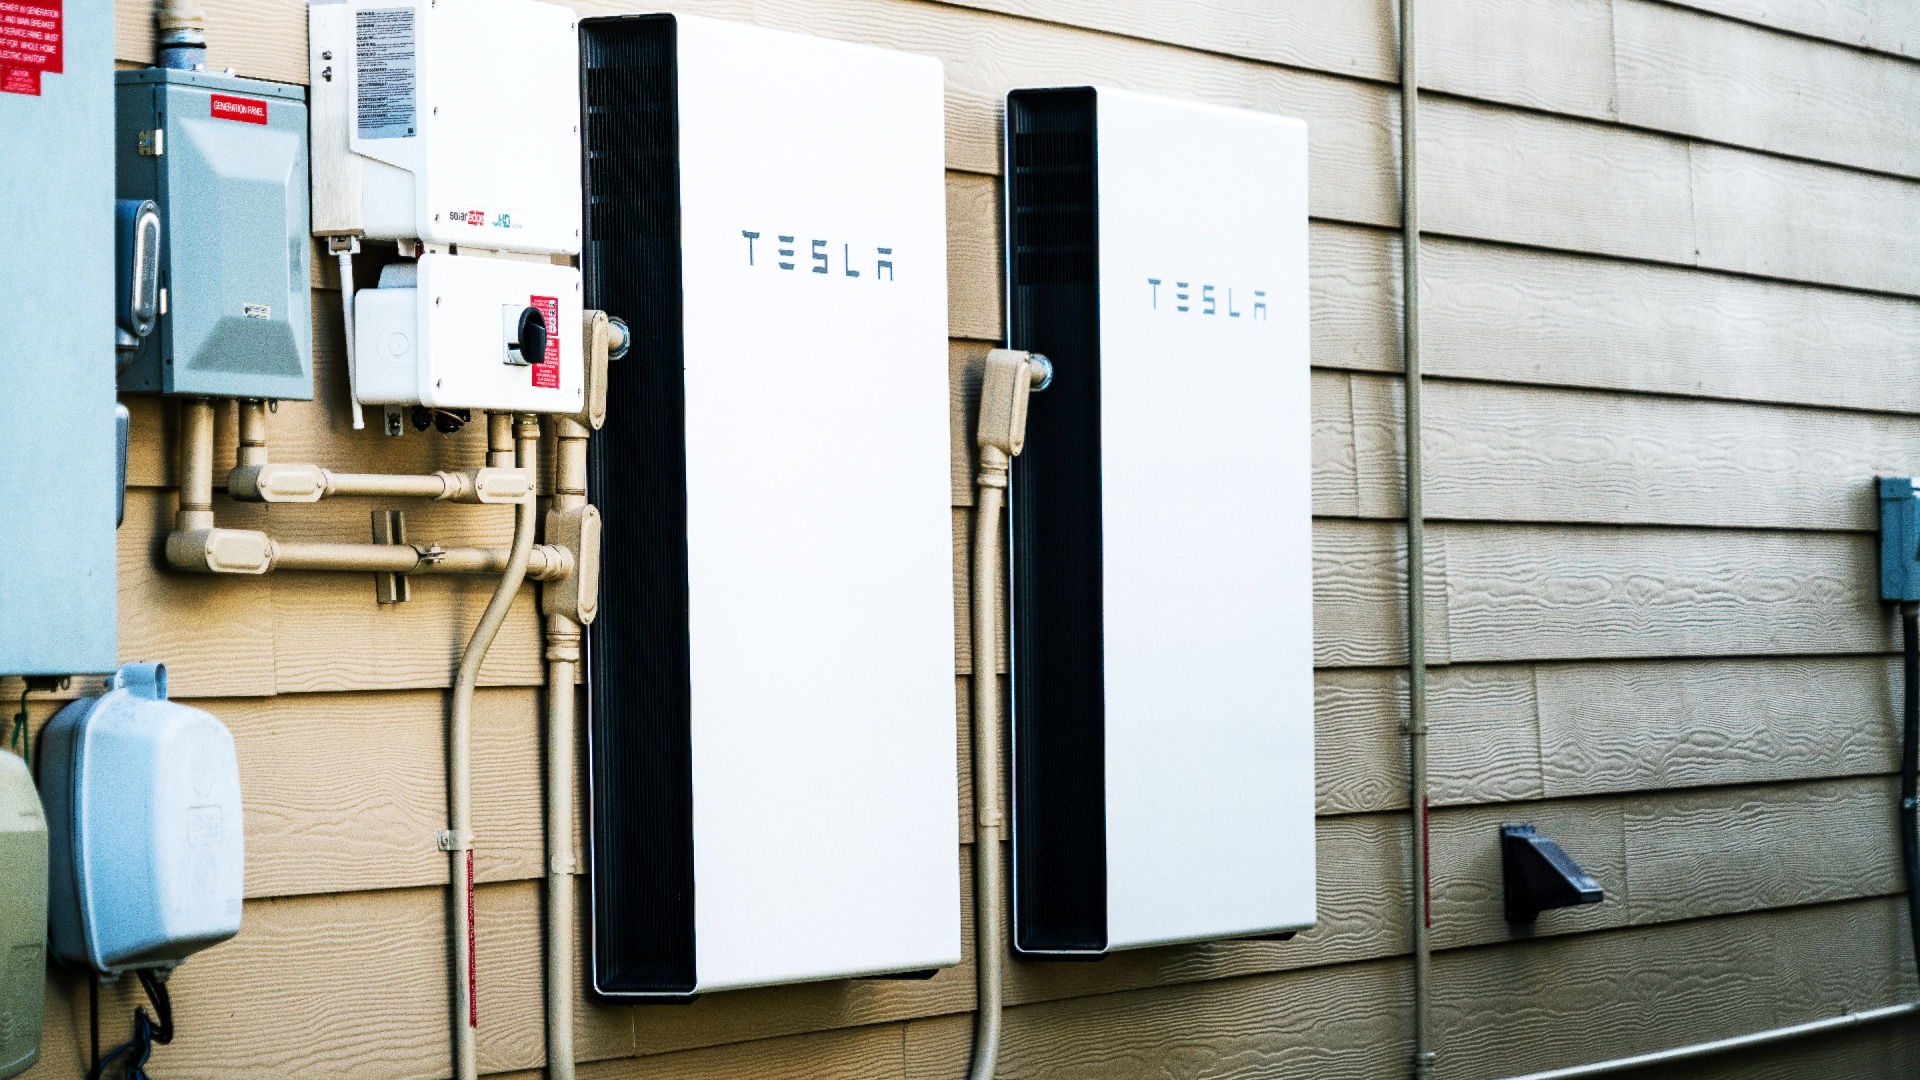 Four Tesla Powerwall batteries have been installed in the hall.